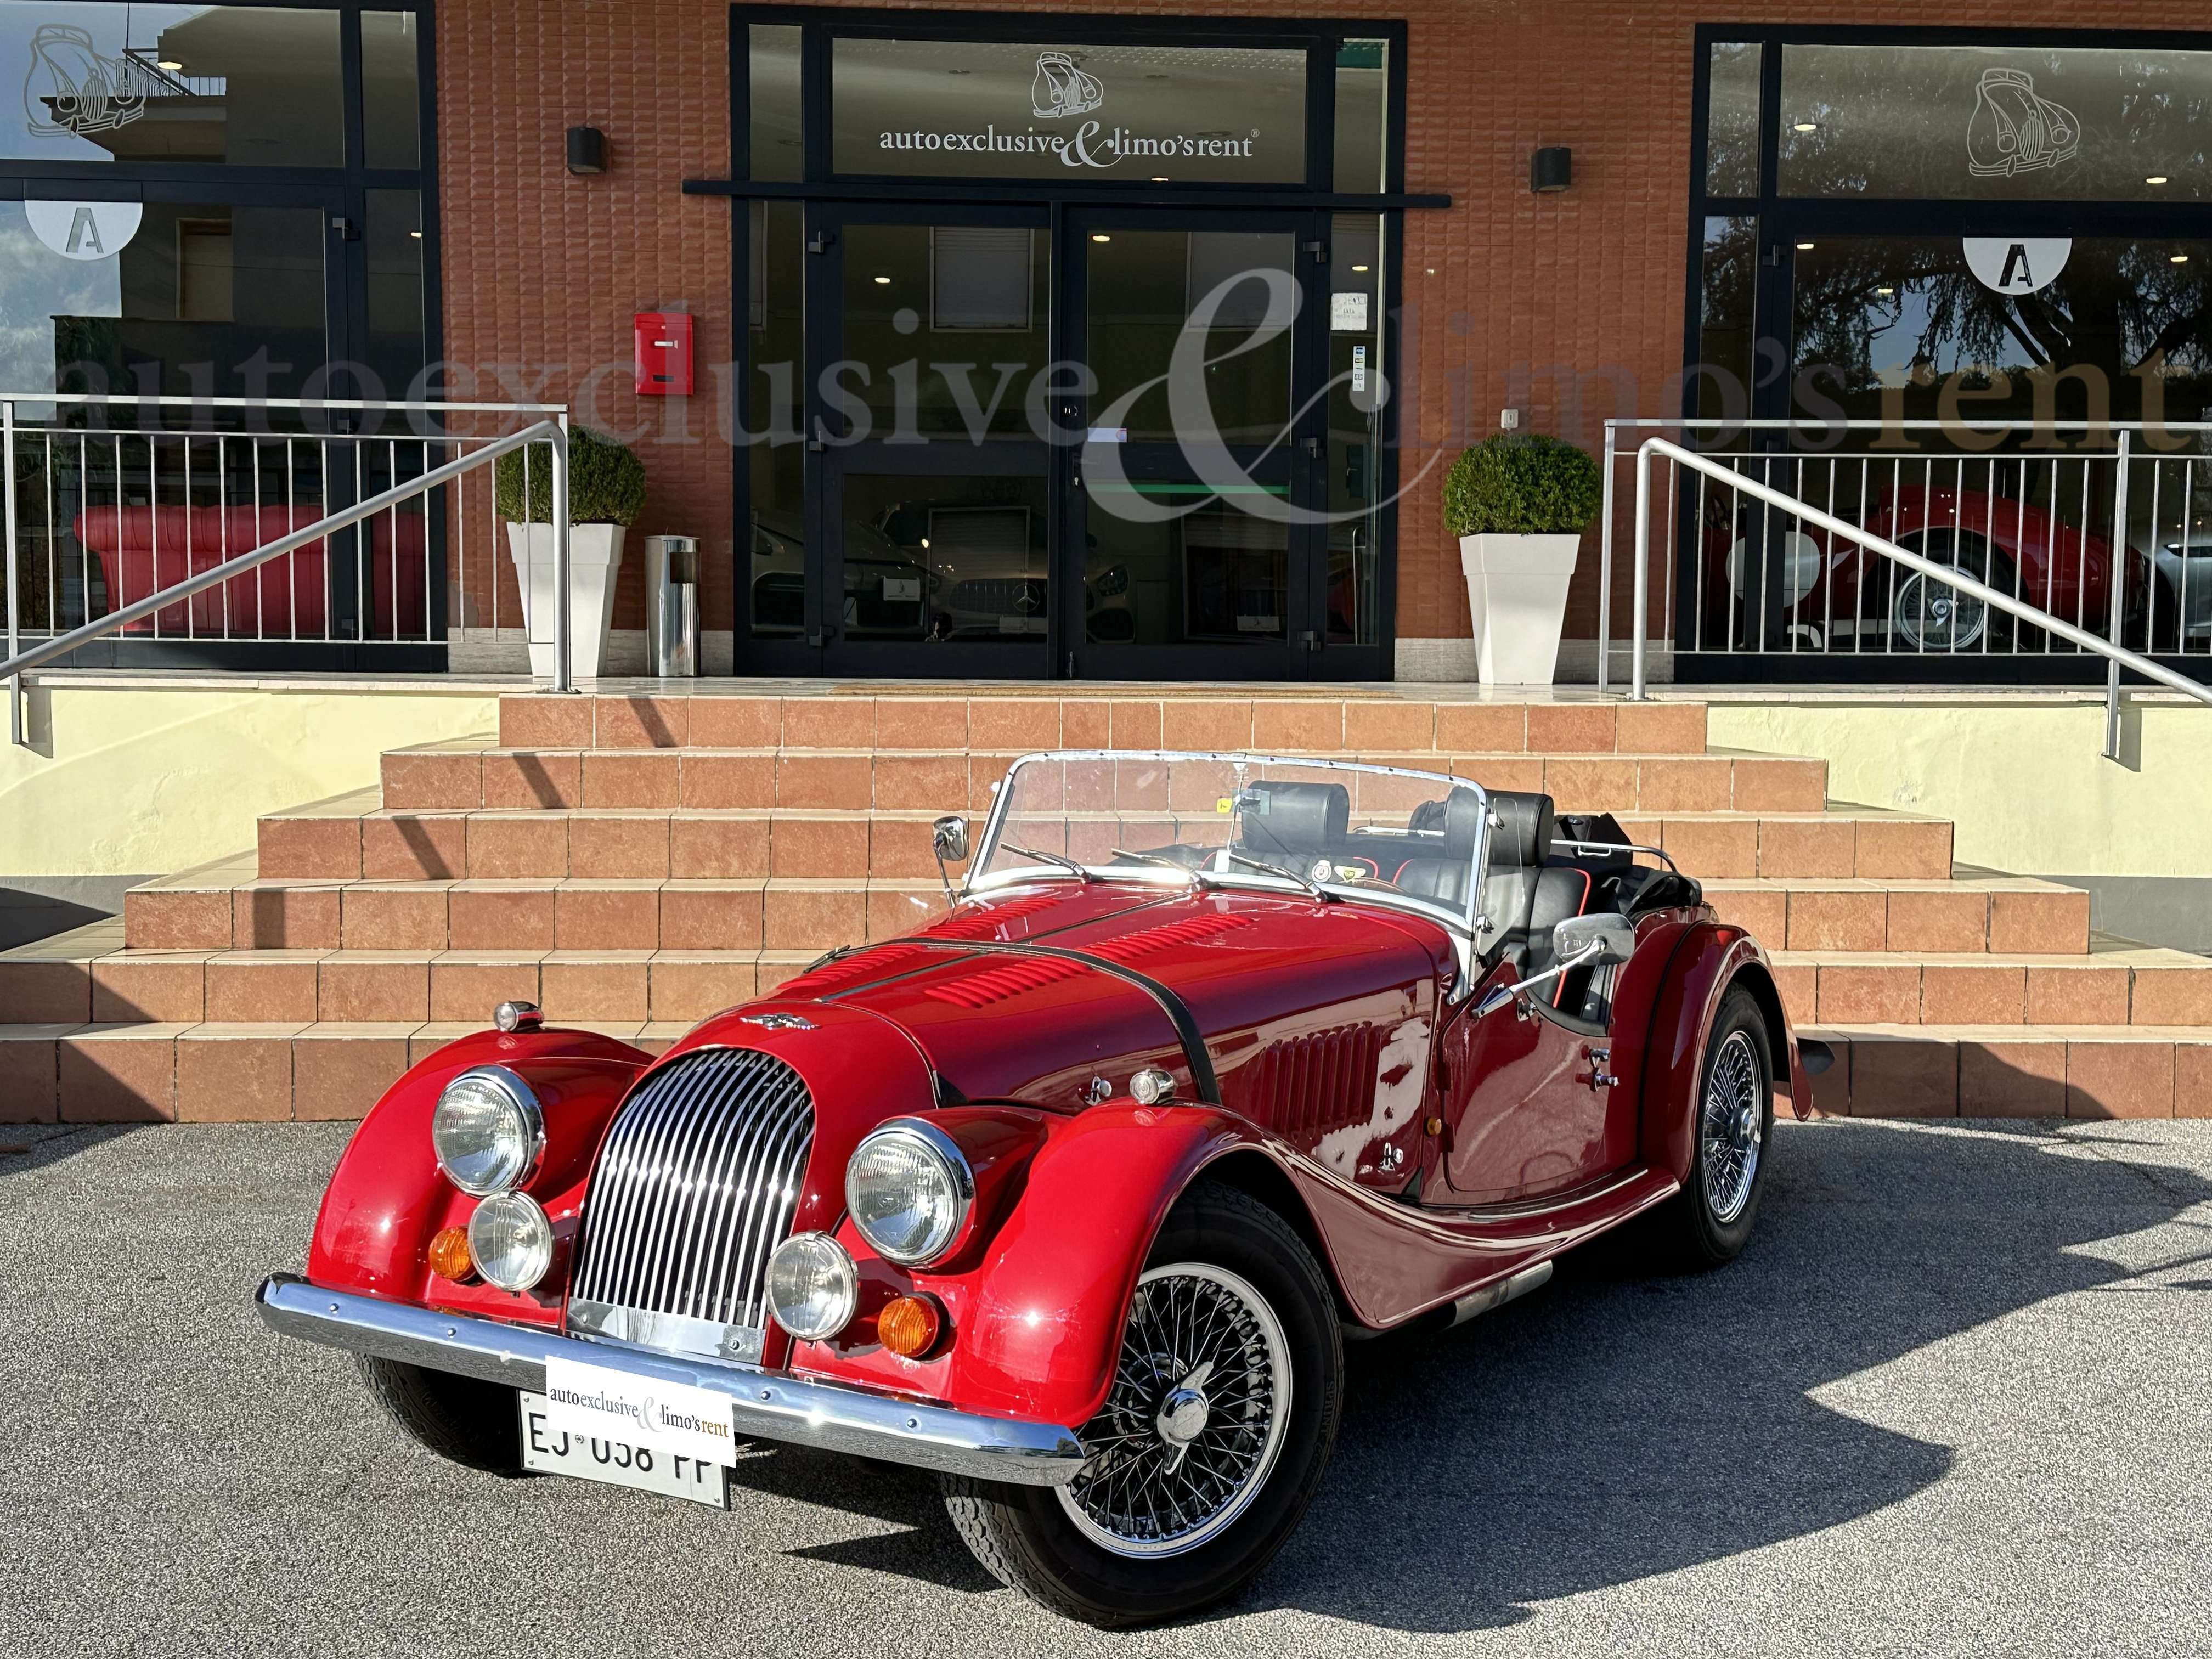 Morgan 4/4 Convertible in Red used in Pistoia - Pt for € 39,500.-